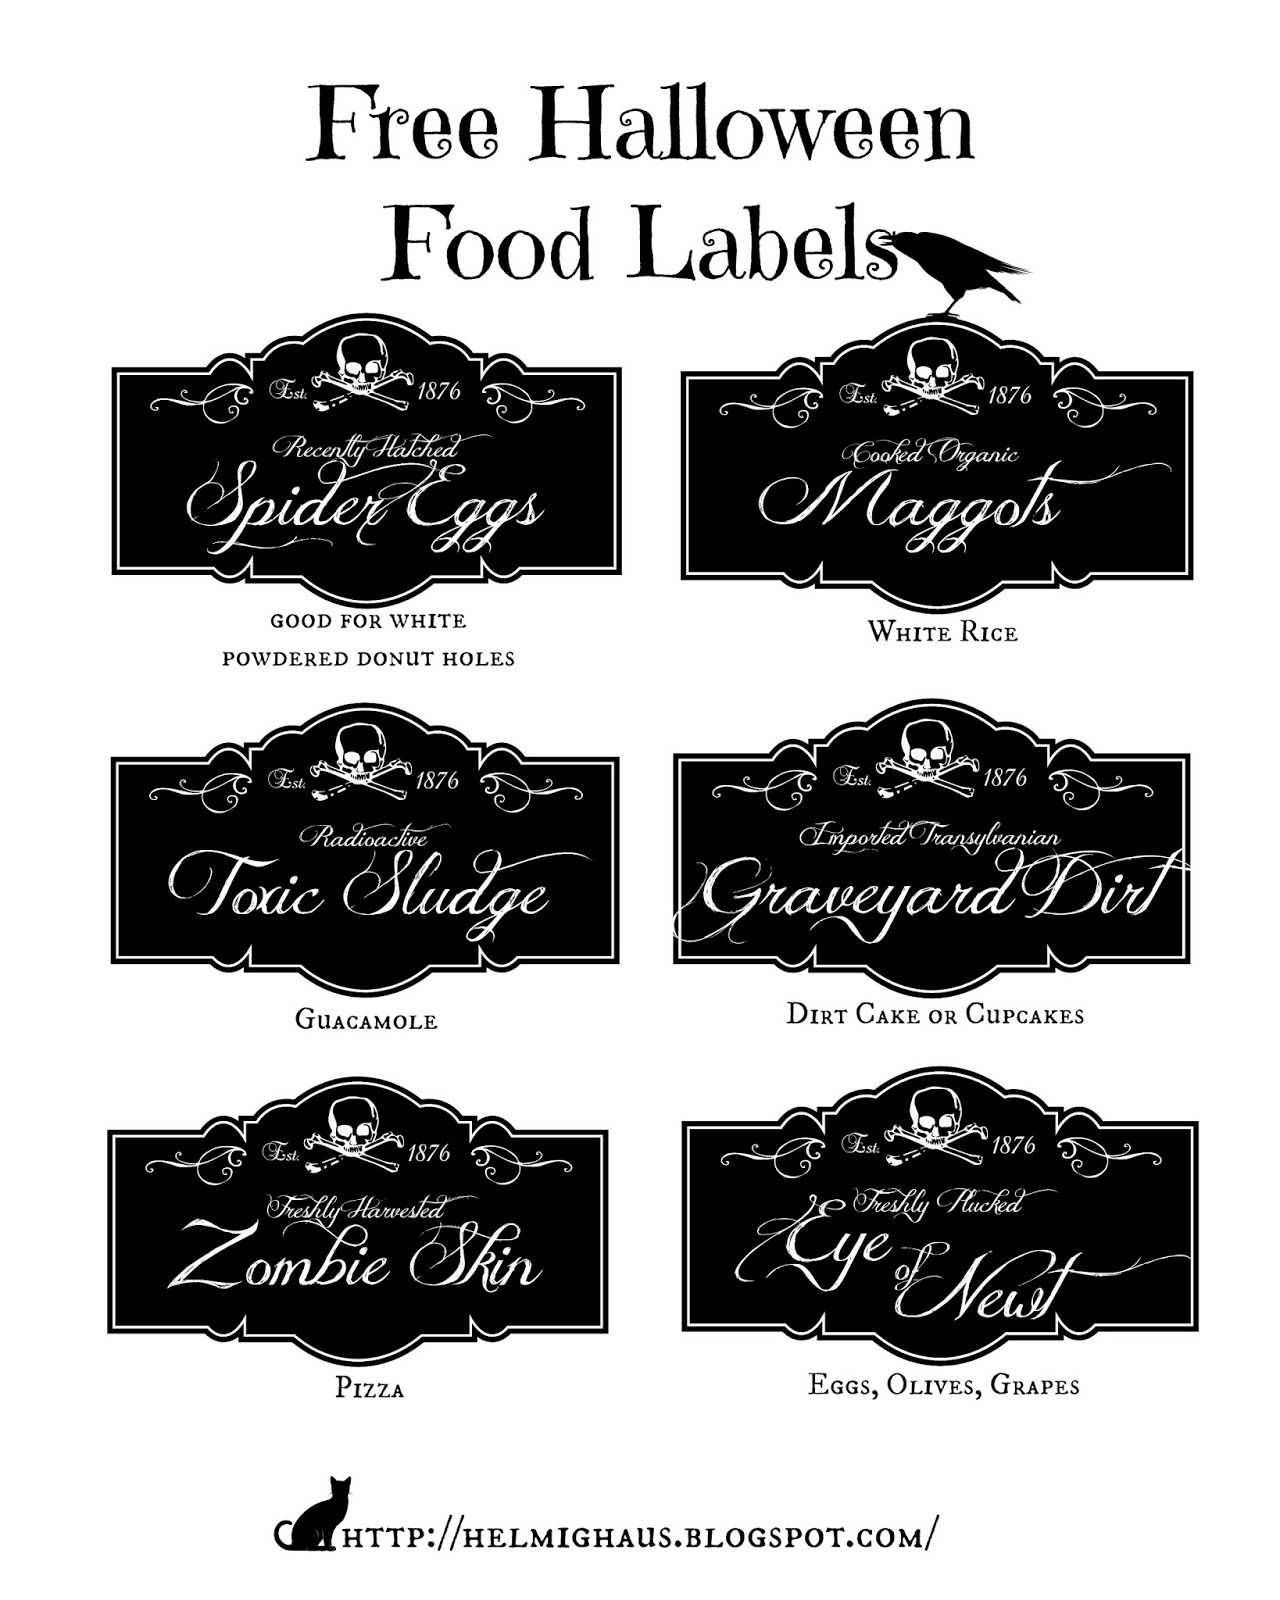 helmighaus-free-halloween-party-table-labels